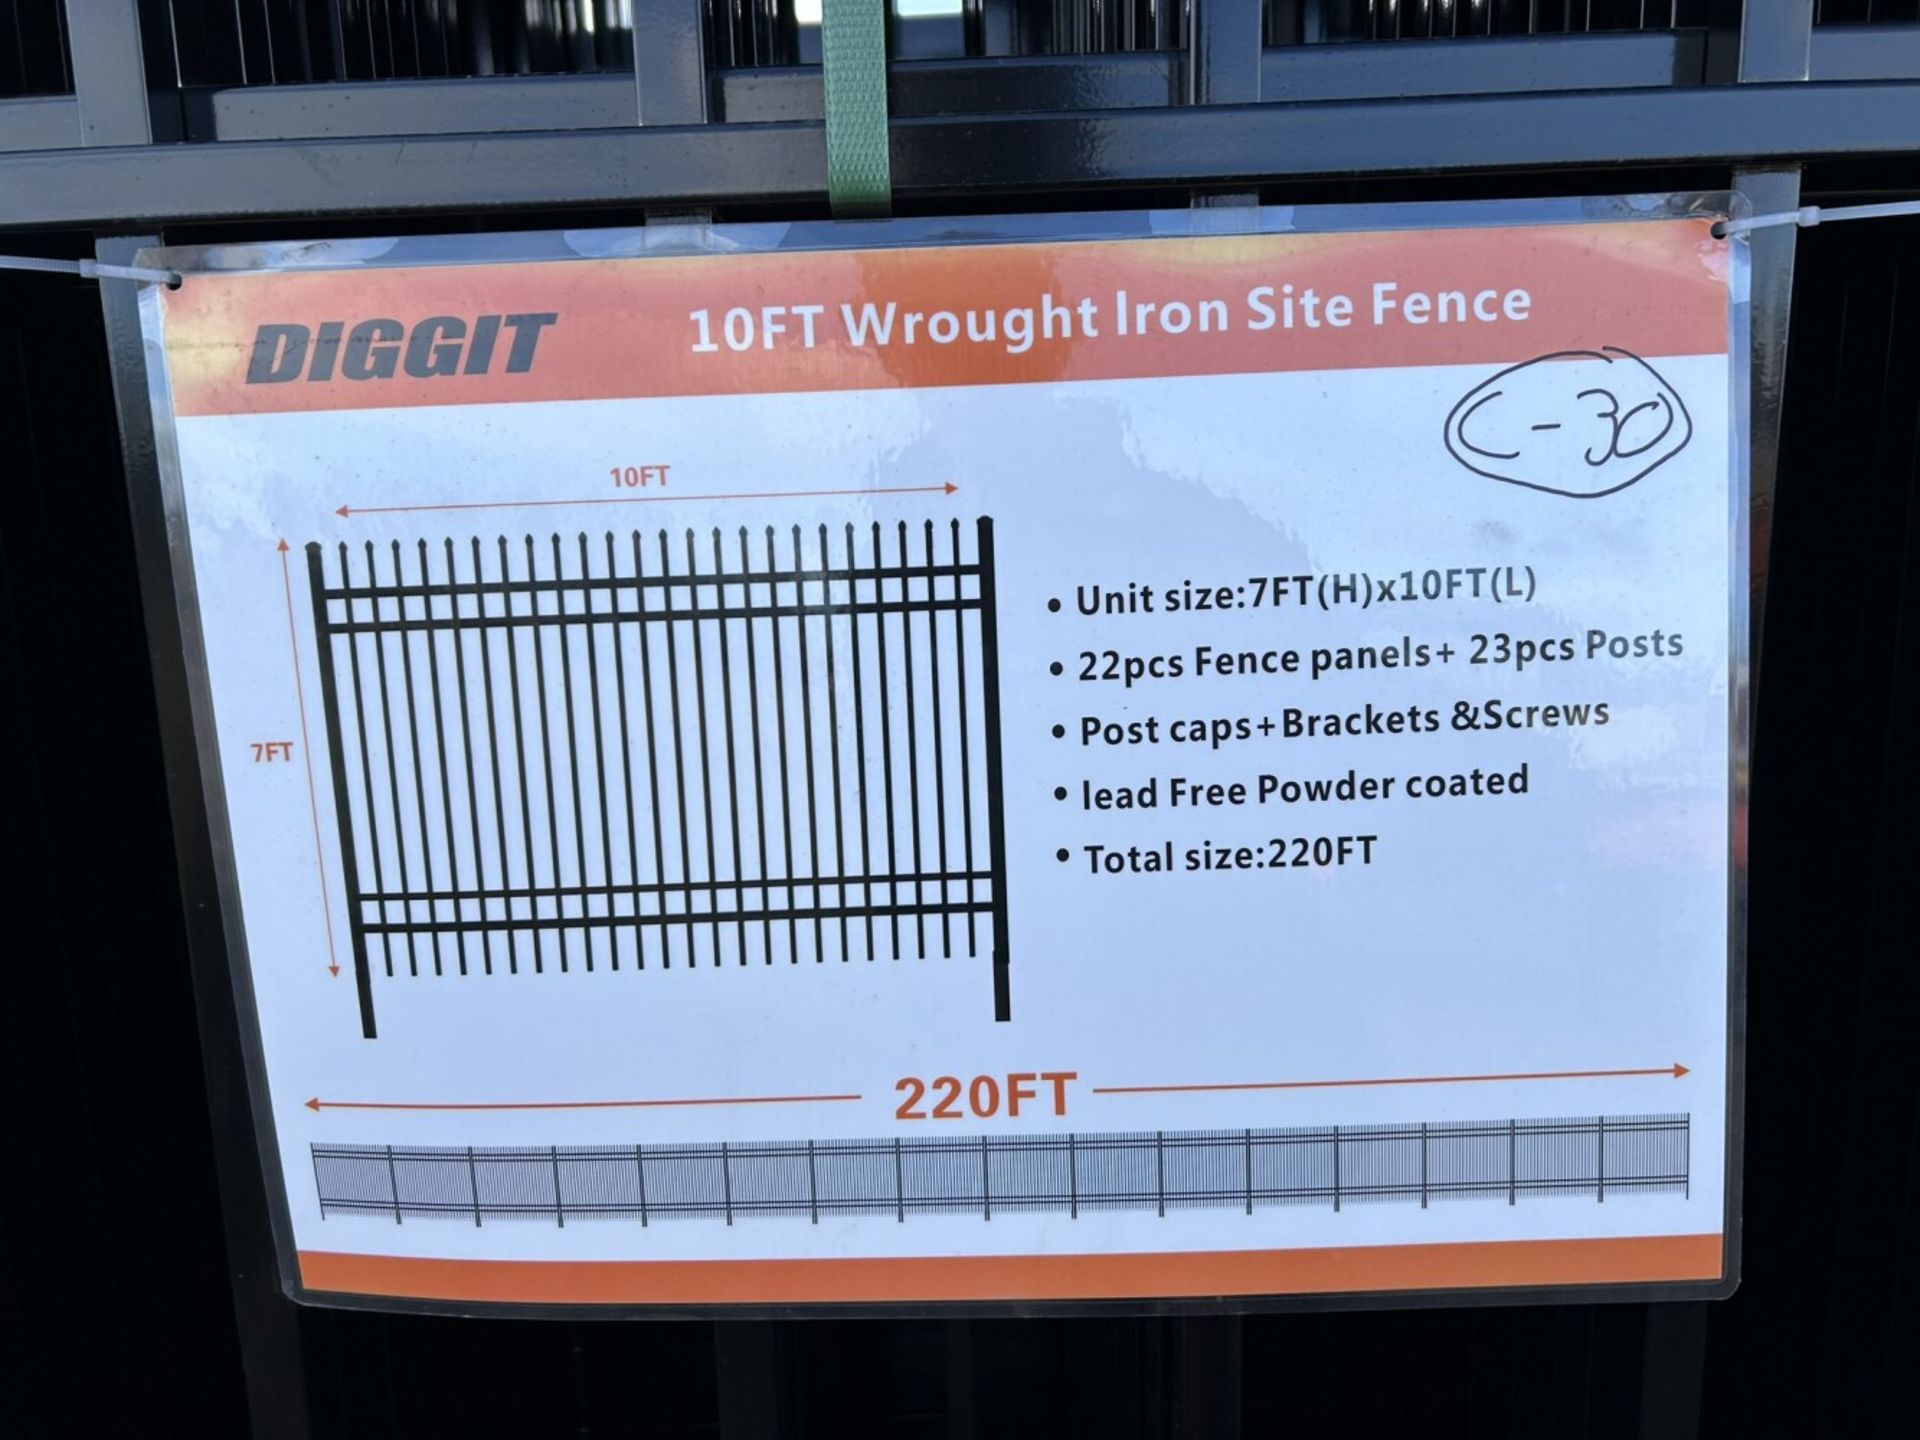 DIGGIT 10 FT ROD IRON SITE SITE FENCES - 22 PANELS 7 FT HIGH - Image 2 of 6